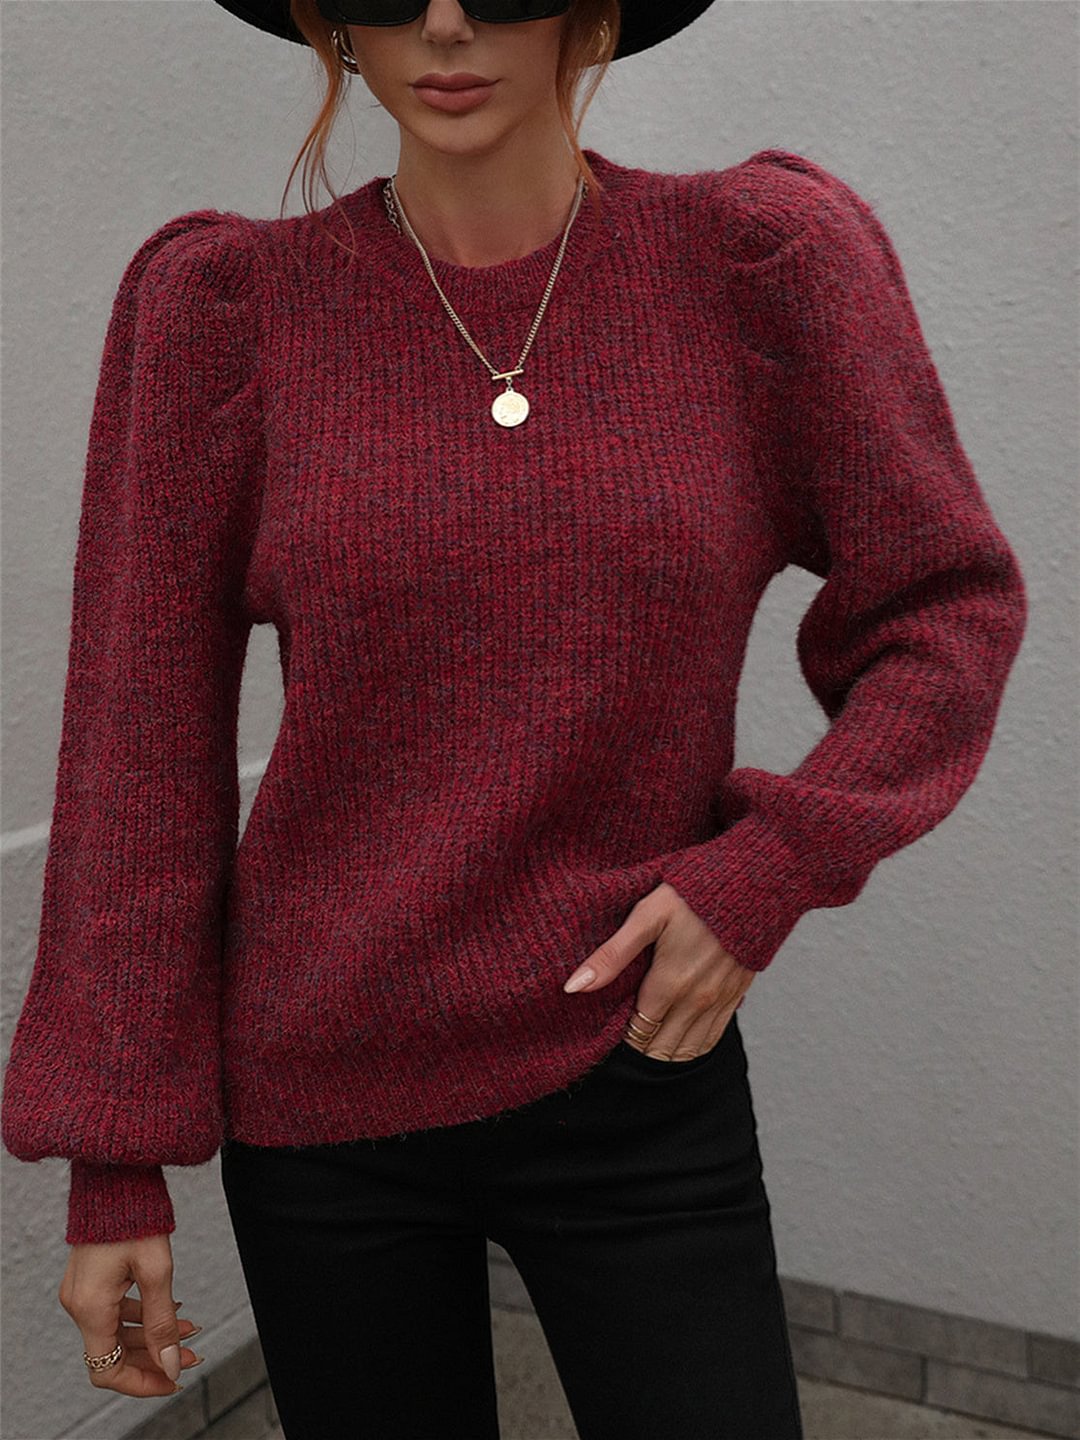 Women's Long Sleeve Scoop Neck Solid Color Top Knit Sweater